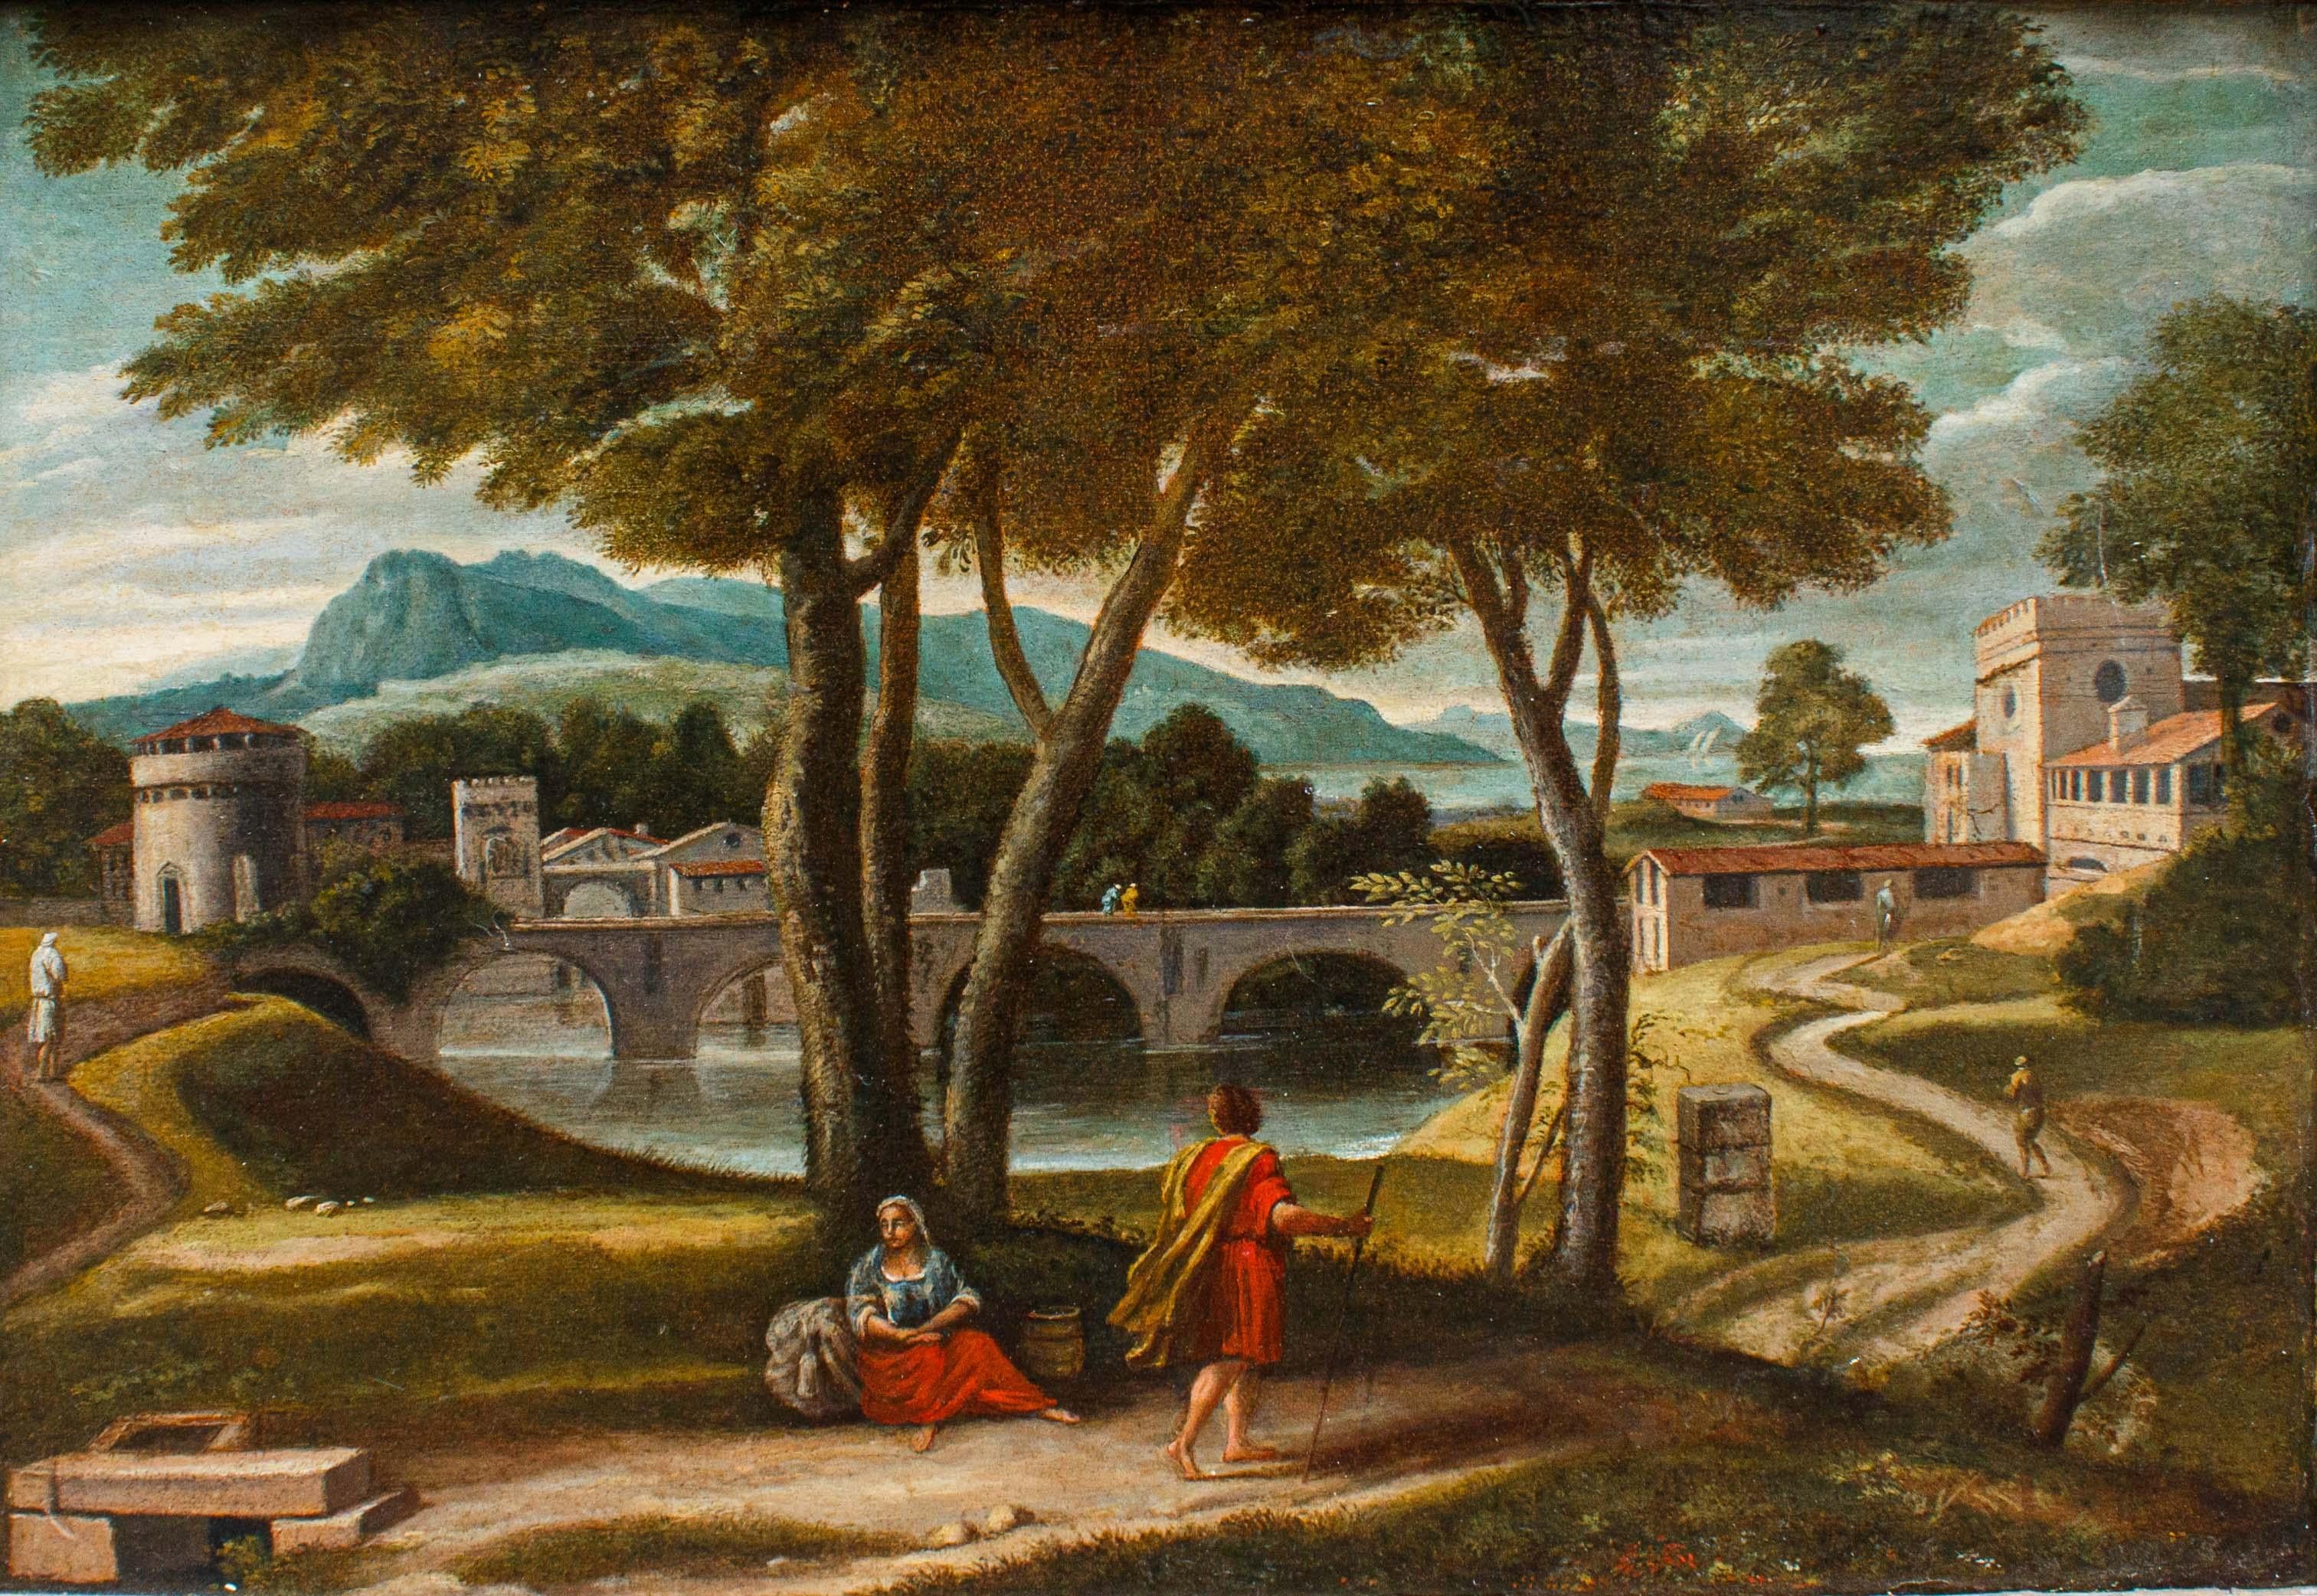 Roman school of the 17th century

Landscape with bridge - Christ and the Samaritan woman at the well

Oil on canvas, cm 42 x 59,5 - With frame, cm 54, 5 x 71 cm 

The small canvas portrays a broad view of the city surrounded by a bucolic and